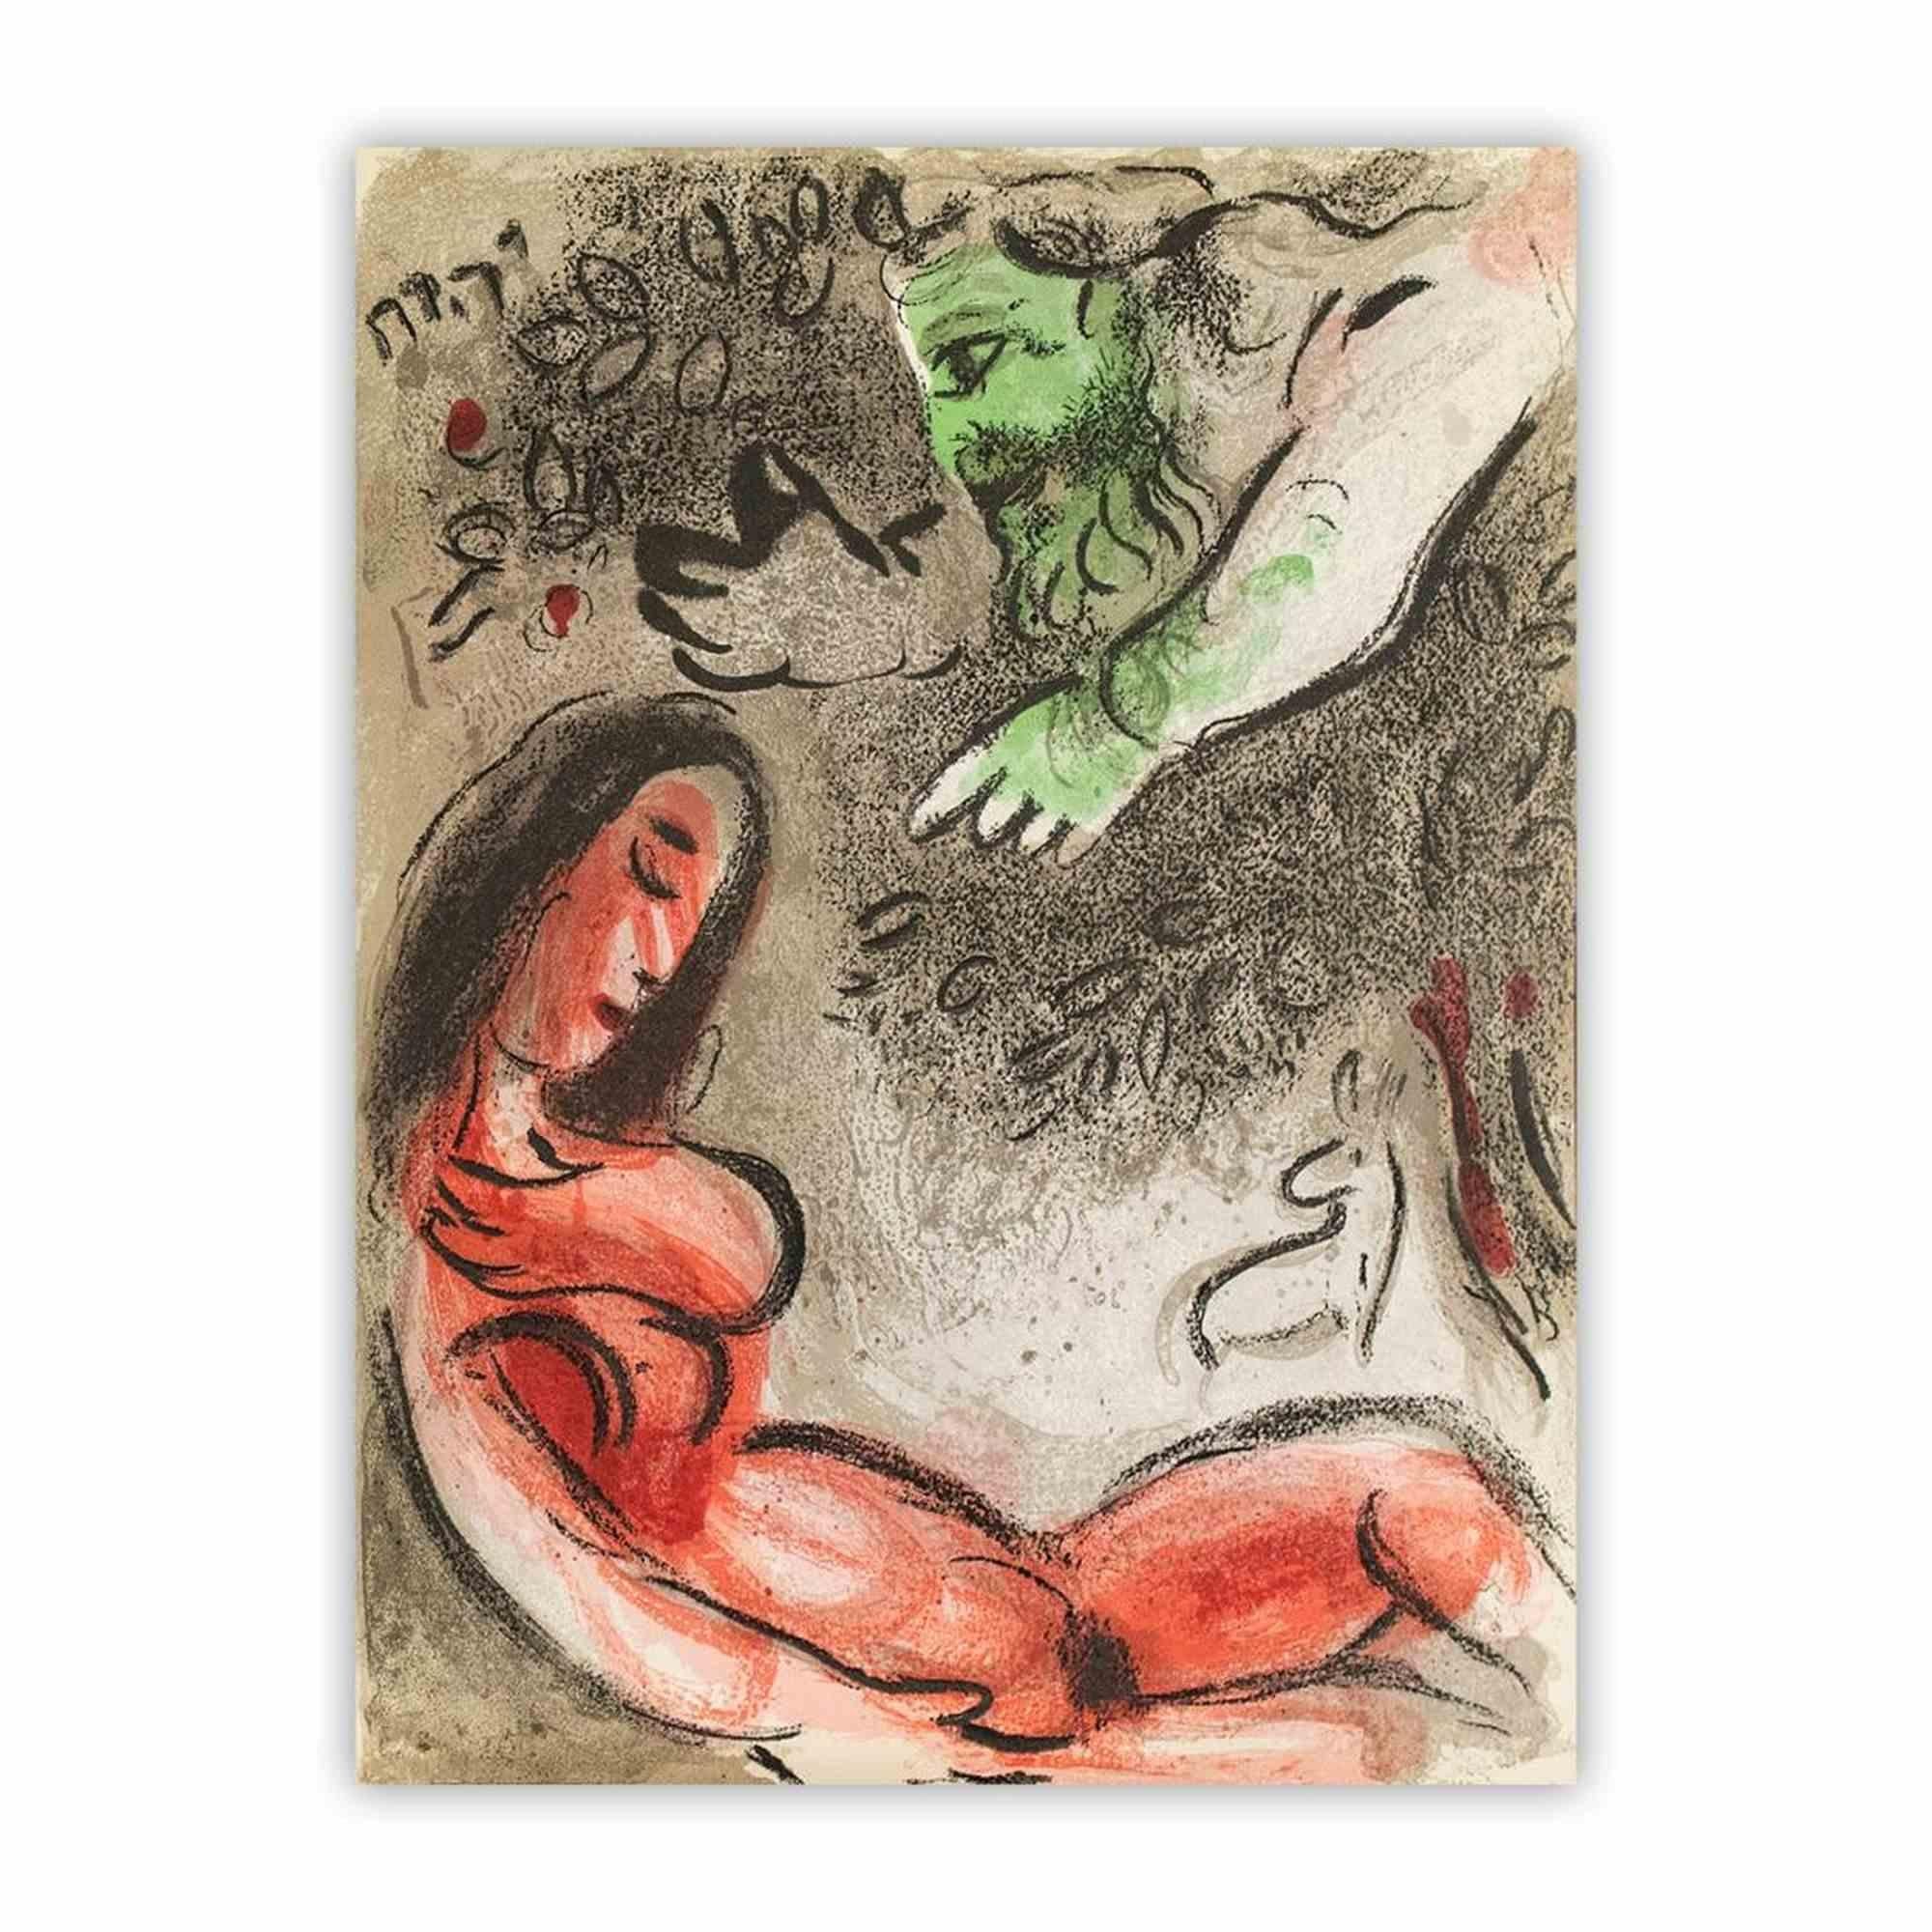 Eve cursed by God  is a an artwork from the Series "The Bible", by Marc Chagall in 1960.

Mixed colored lithograph on brown-toned paper, no signature.

Edition of 6500 unsigned lithographs. Printed by Mourlot and published by Tériade,